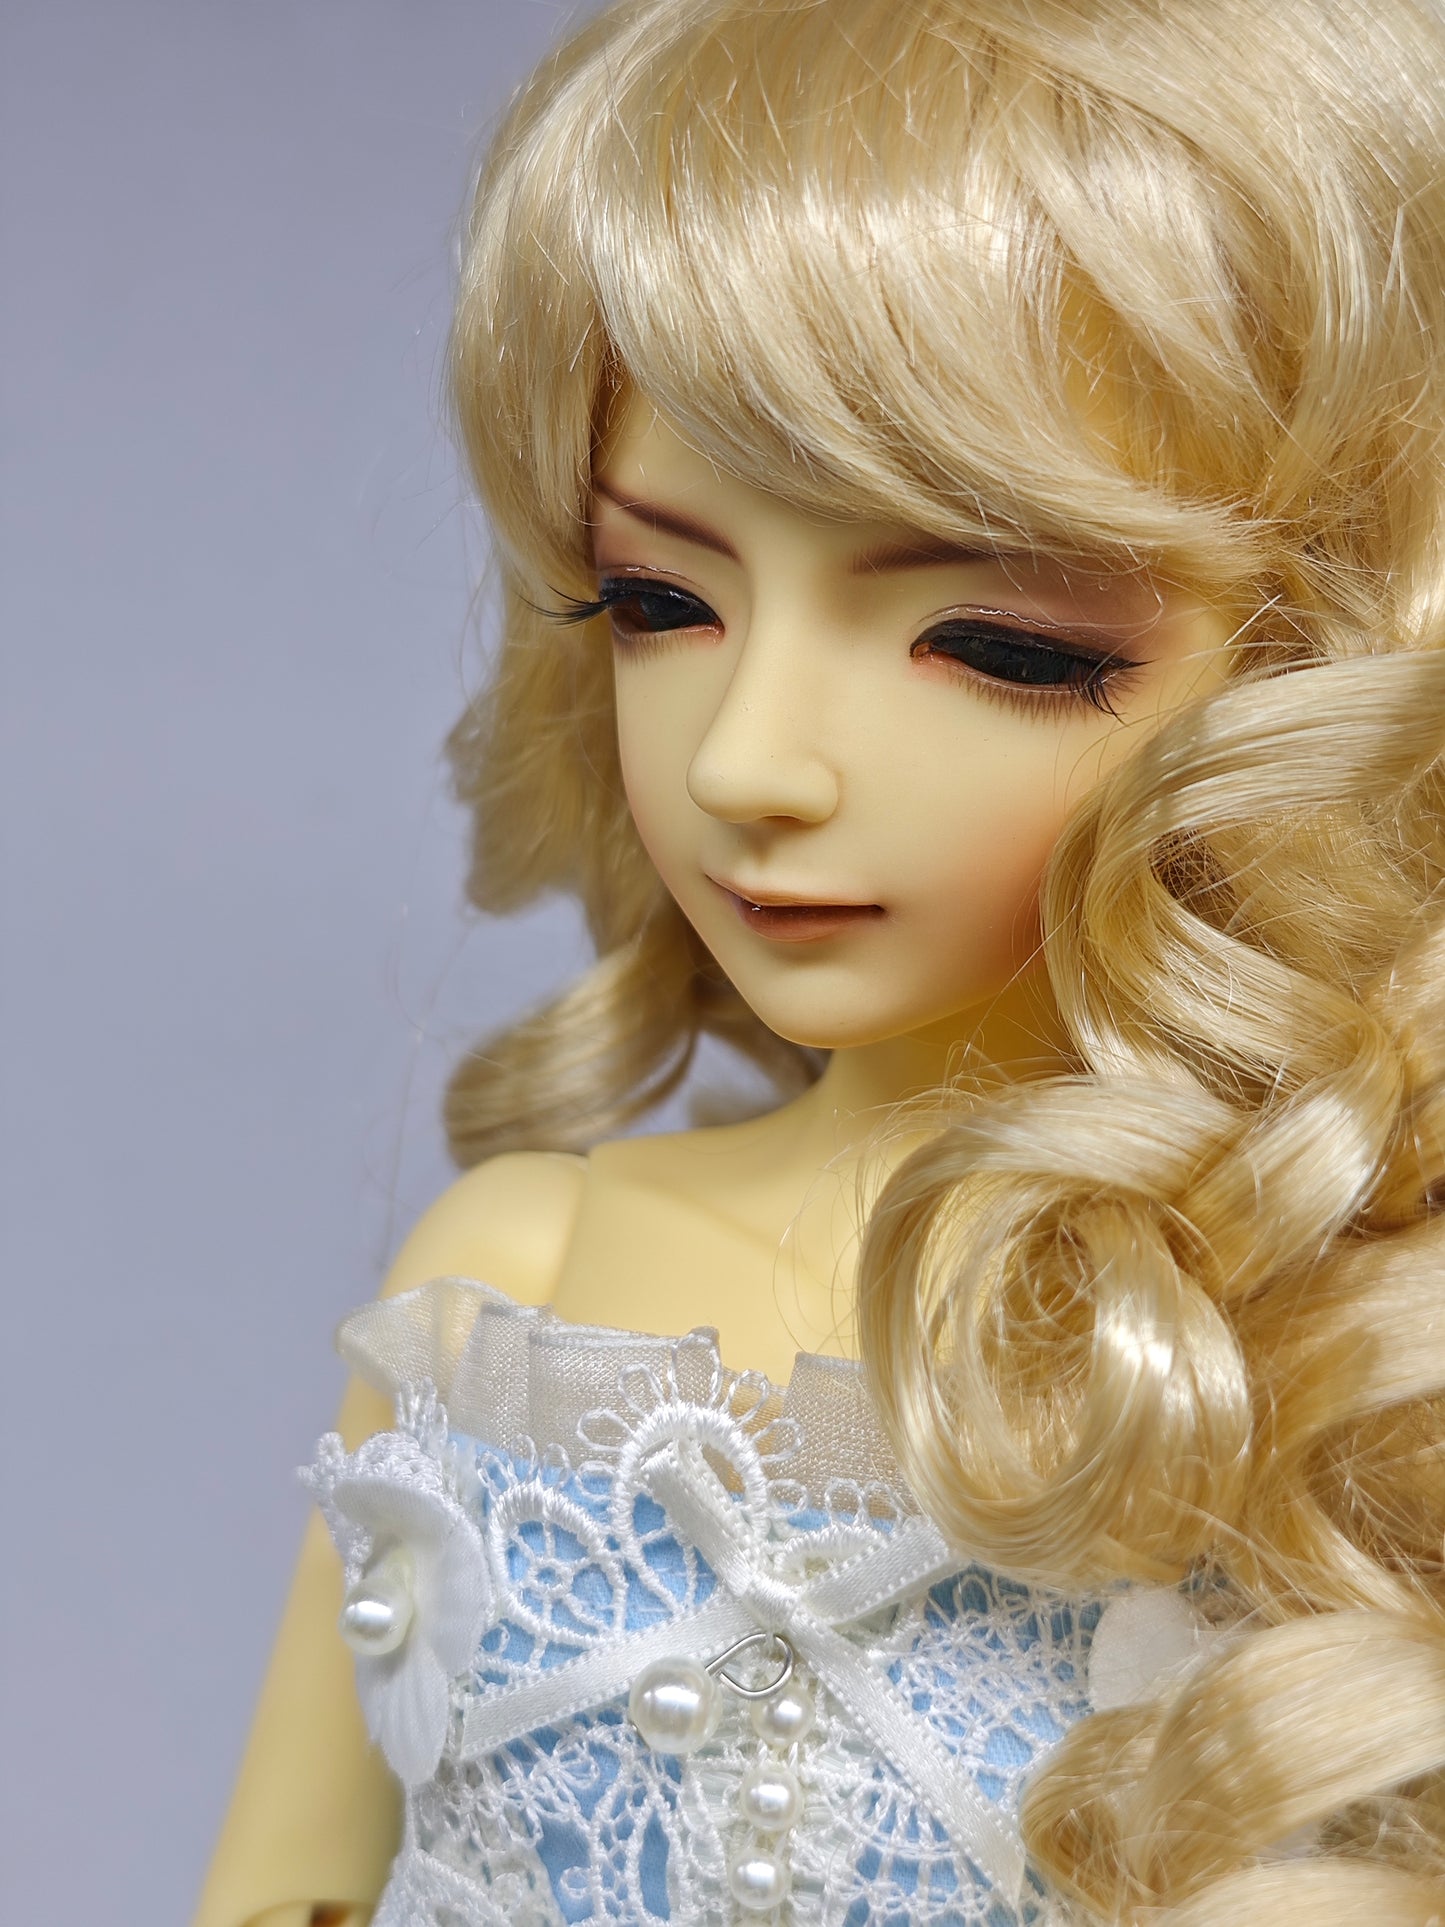 1/4 girl doll in yellow skin with makeup, clothes, shoes and wig